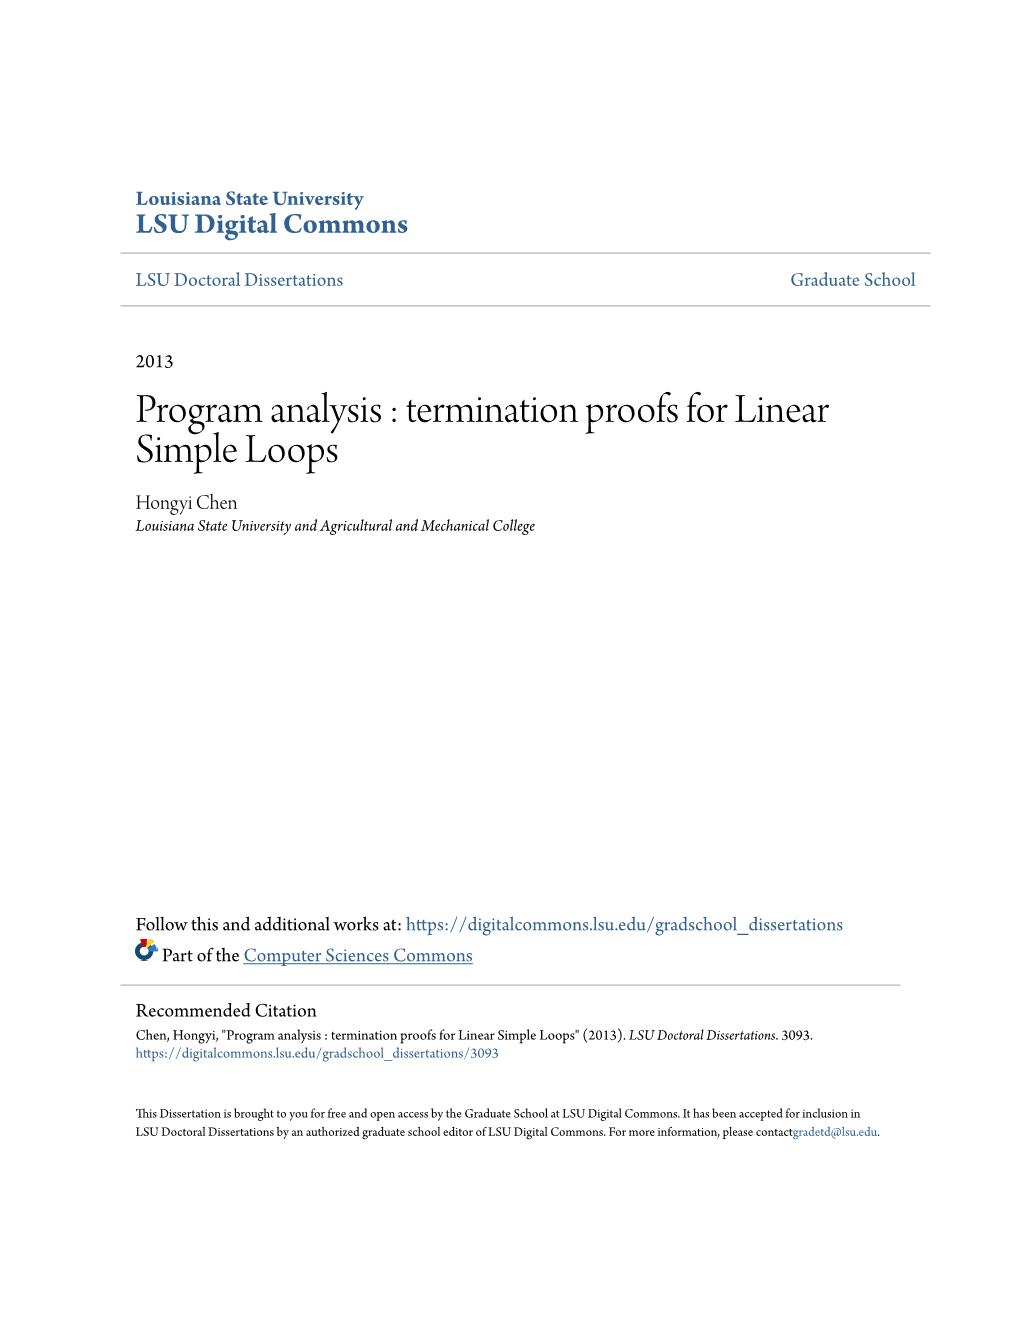 Termination Proofs for Linear Simple Loops Hongyi Chen Louisiana State University and Agricultural and Mechanical College